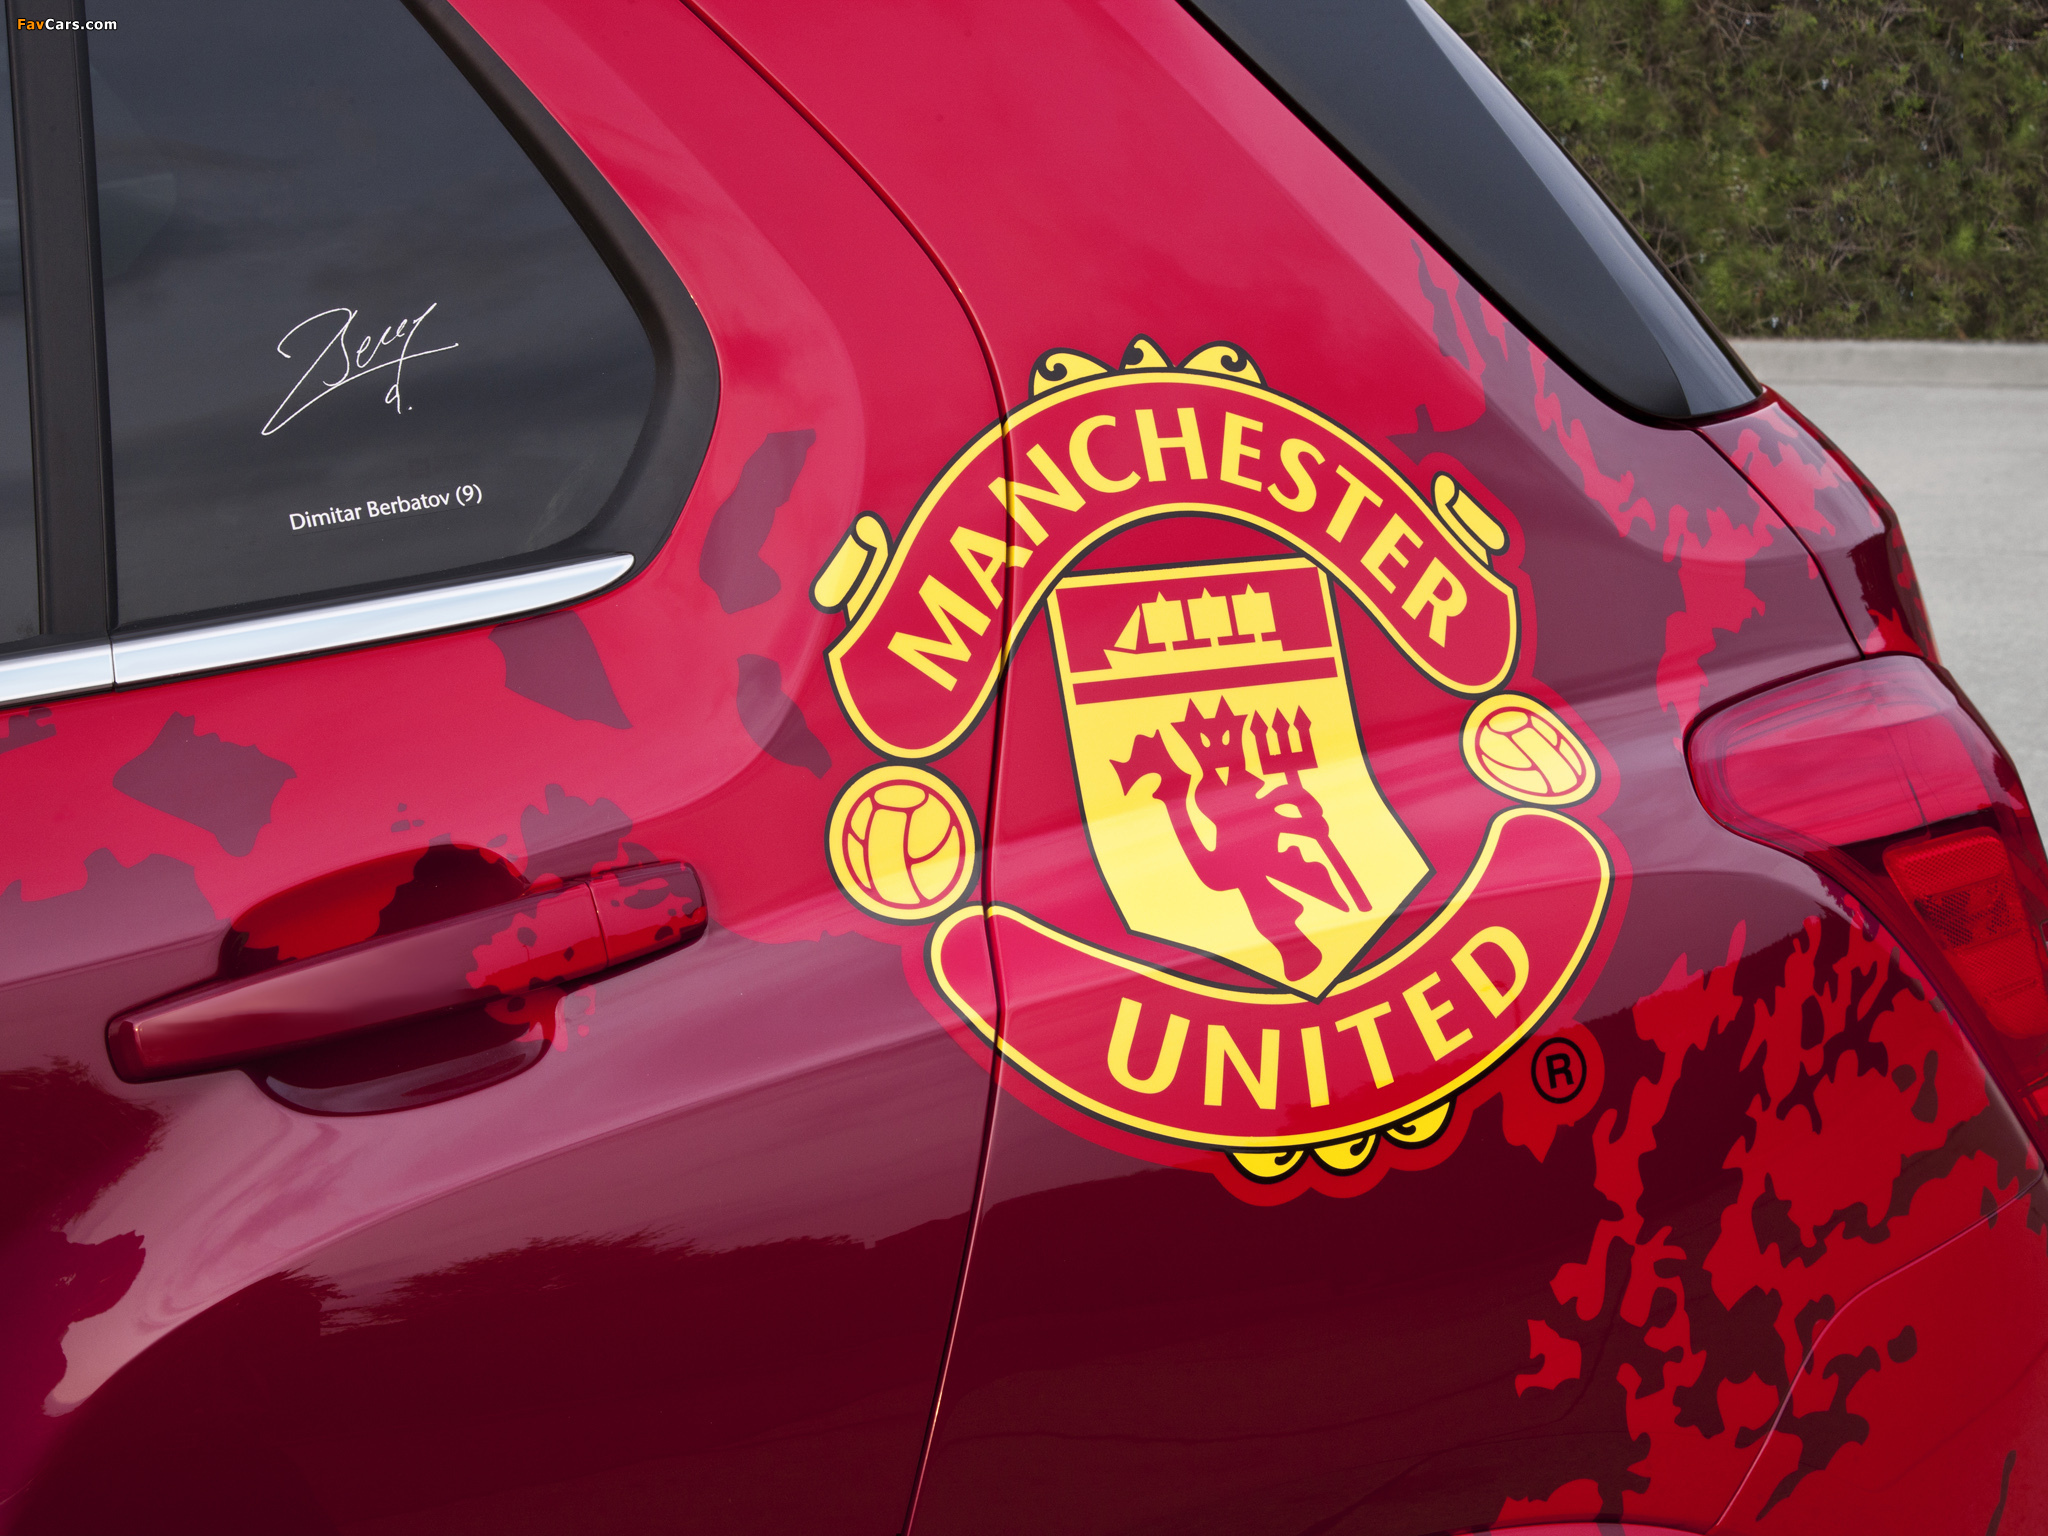 Chevrolet Trax Manchester United 2012 wallpapers (2048 x 1536)